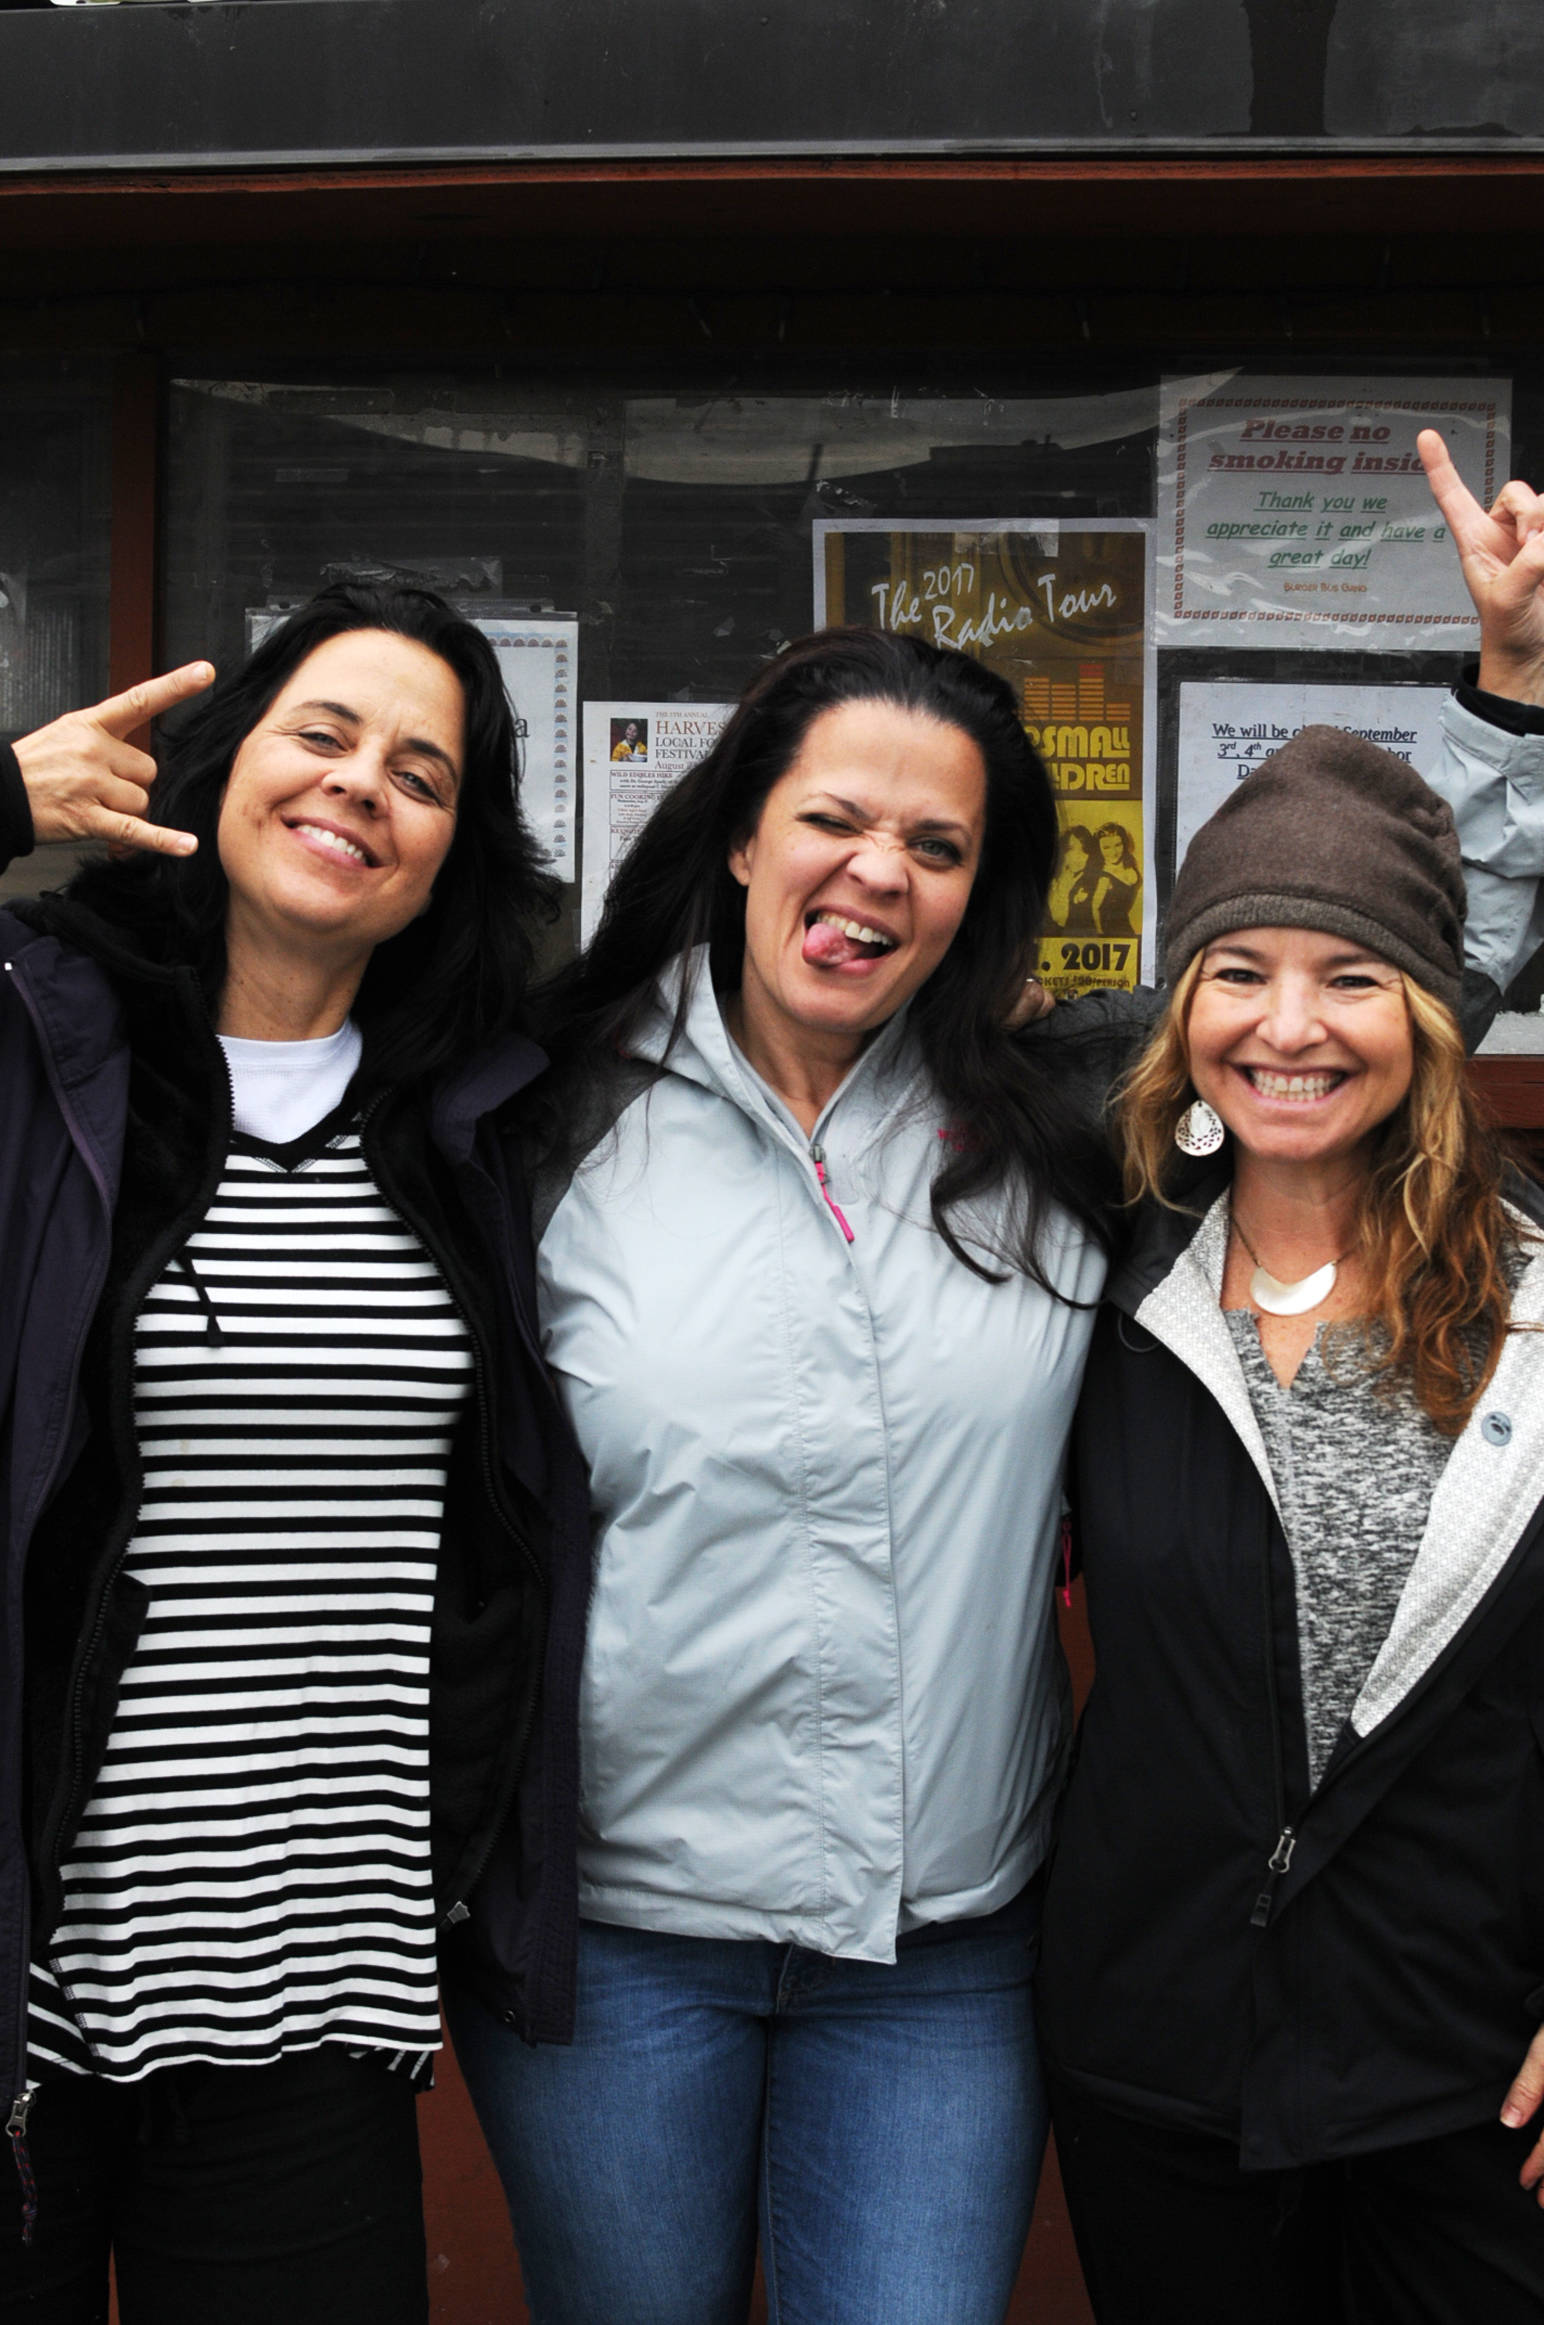 (From left) Lisa Pimentel, Joanie Pimentel and Nicola Berlinsky, the three members of Los Angeles-based rock outfit No Small Children, pose for a photo near the Burger Bus restaurant on Thursday, Aug. 31, 2017 in Kenai, Alaska. The three will perform at an assembly at Nikiski Middle-High School on Friday afternoon, followd by a show at 7 p.m. at the Triumvirate Theatre in North Kenai and another show at Alice’s Champagne Palace in Homer on Saturday. (Photo by Elizabeth Earl/Peninsula Clarion)